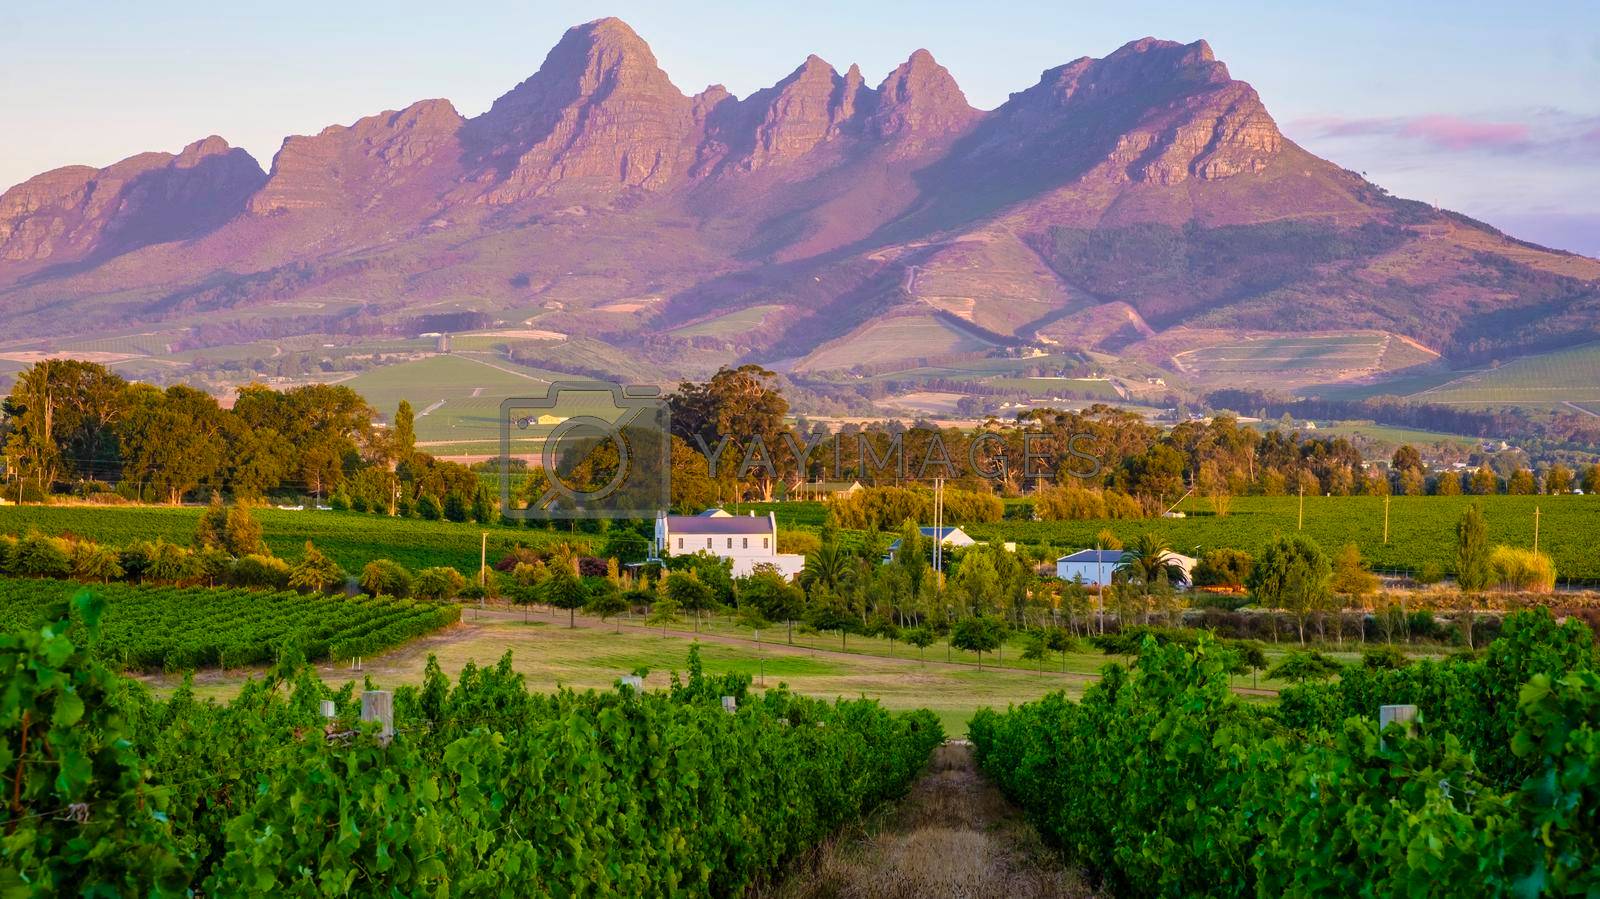 Royalty free image of Vineyard landscape at sunset with mountains in Stellenbosch, near Cape Town, South Africa by fokkebok